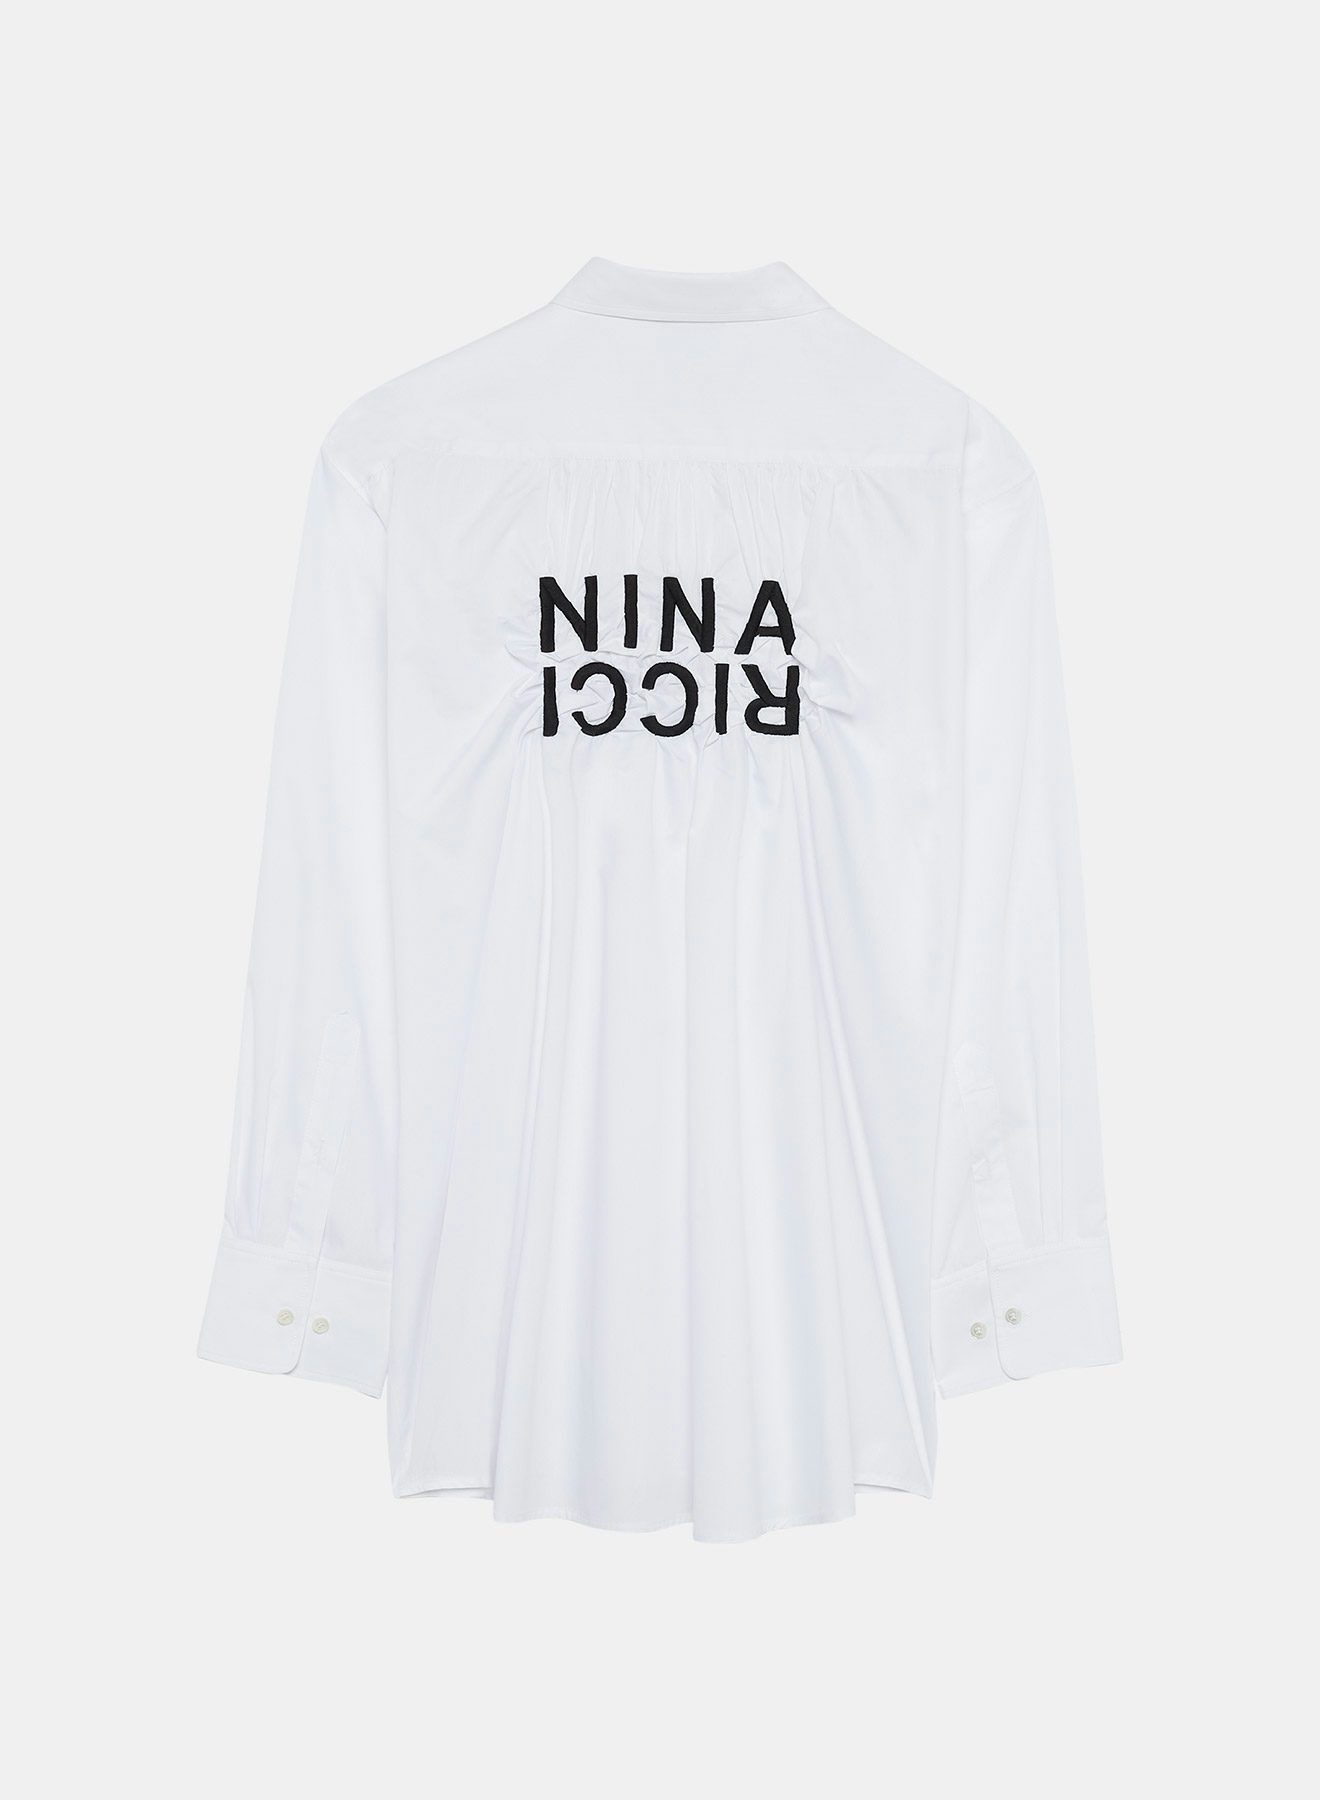 White and Black Crinkle Shirt with Contrasting Nina Ricci embroidery on the back - Nina Ricci